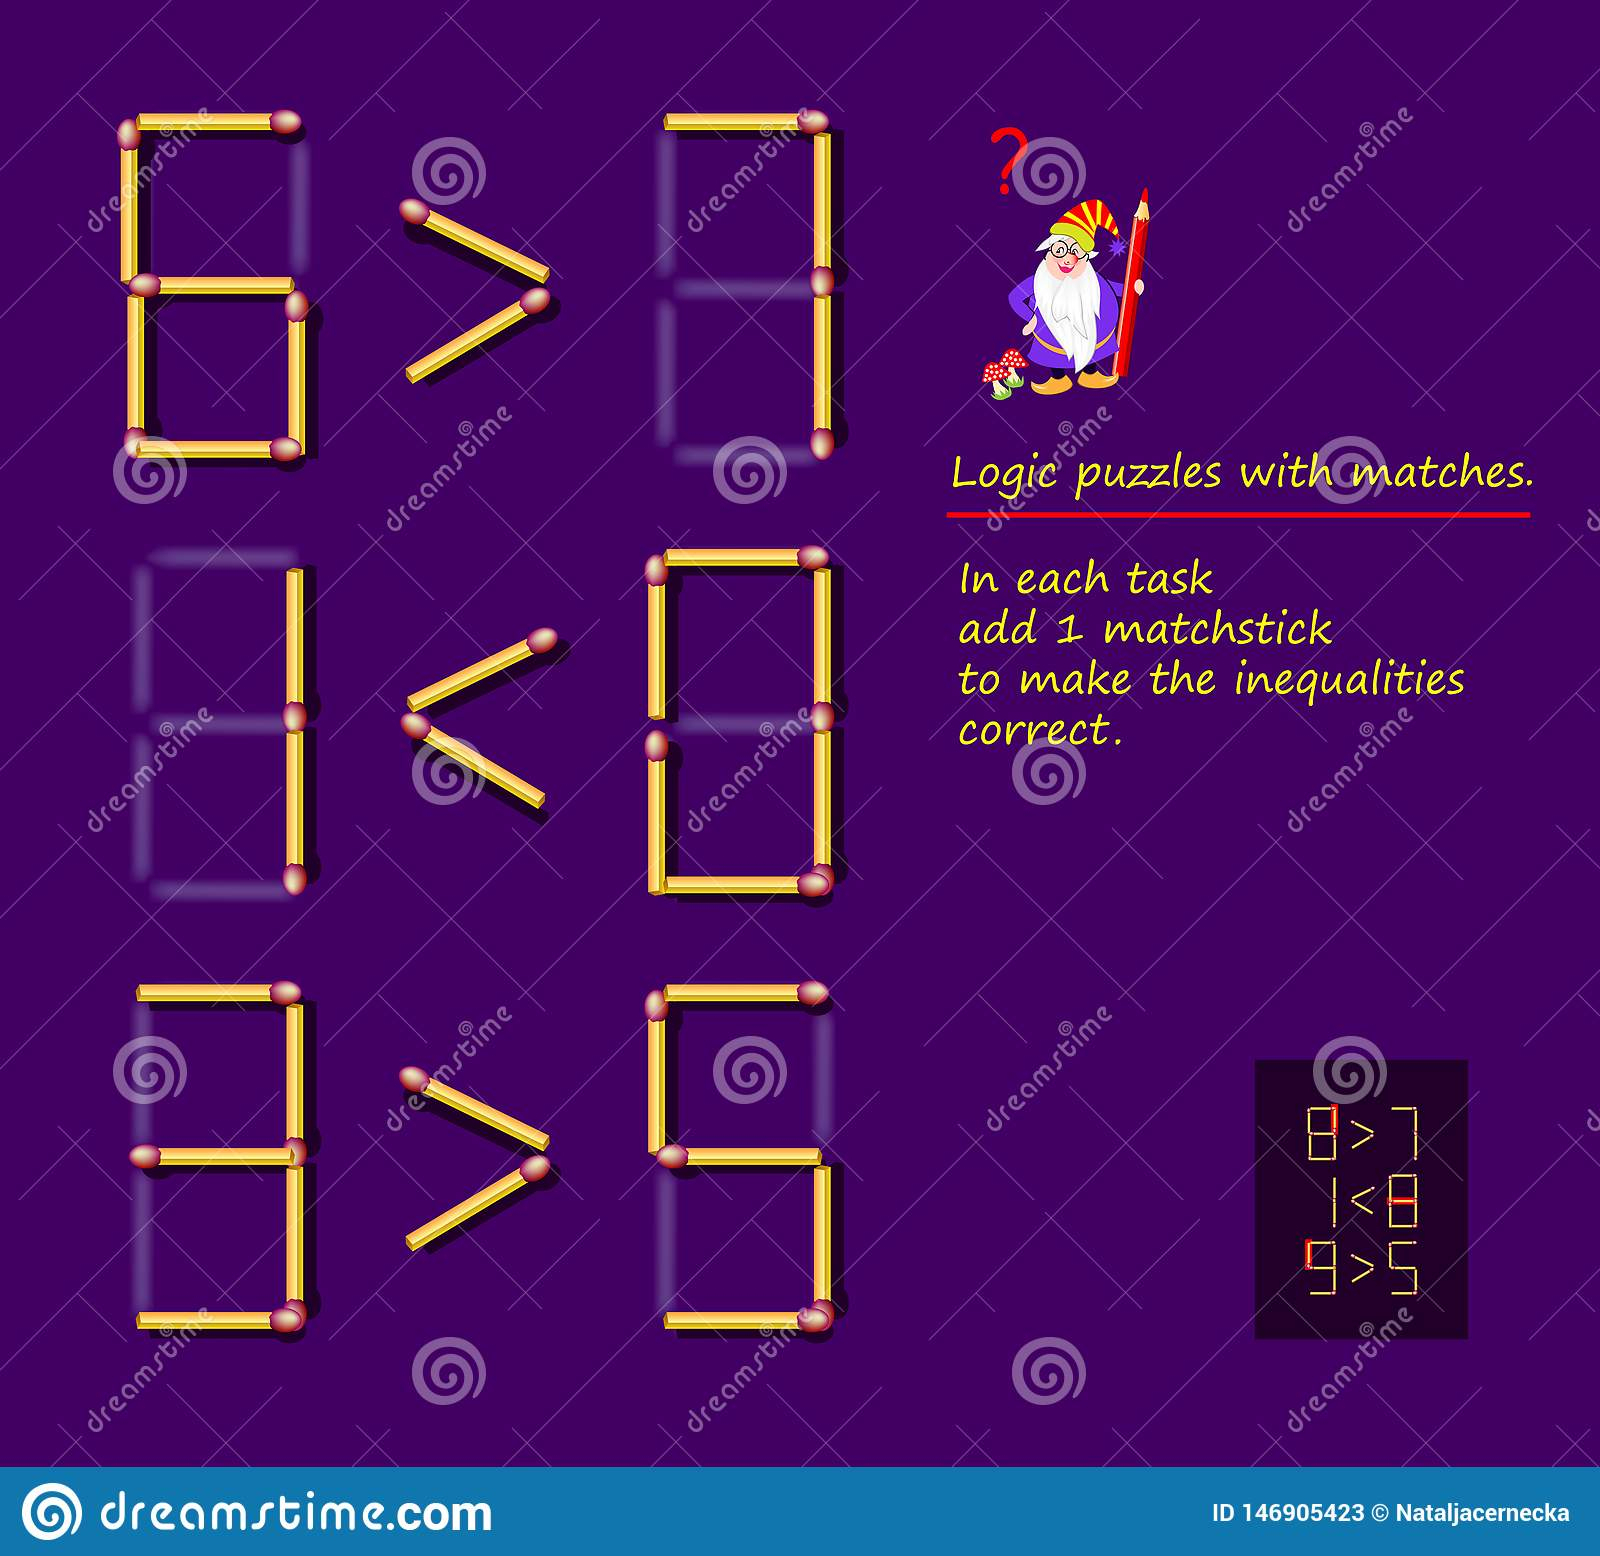 Add One Matchstick Visual Math Puzzle Free Printable Puzzle Games